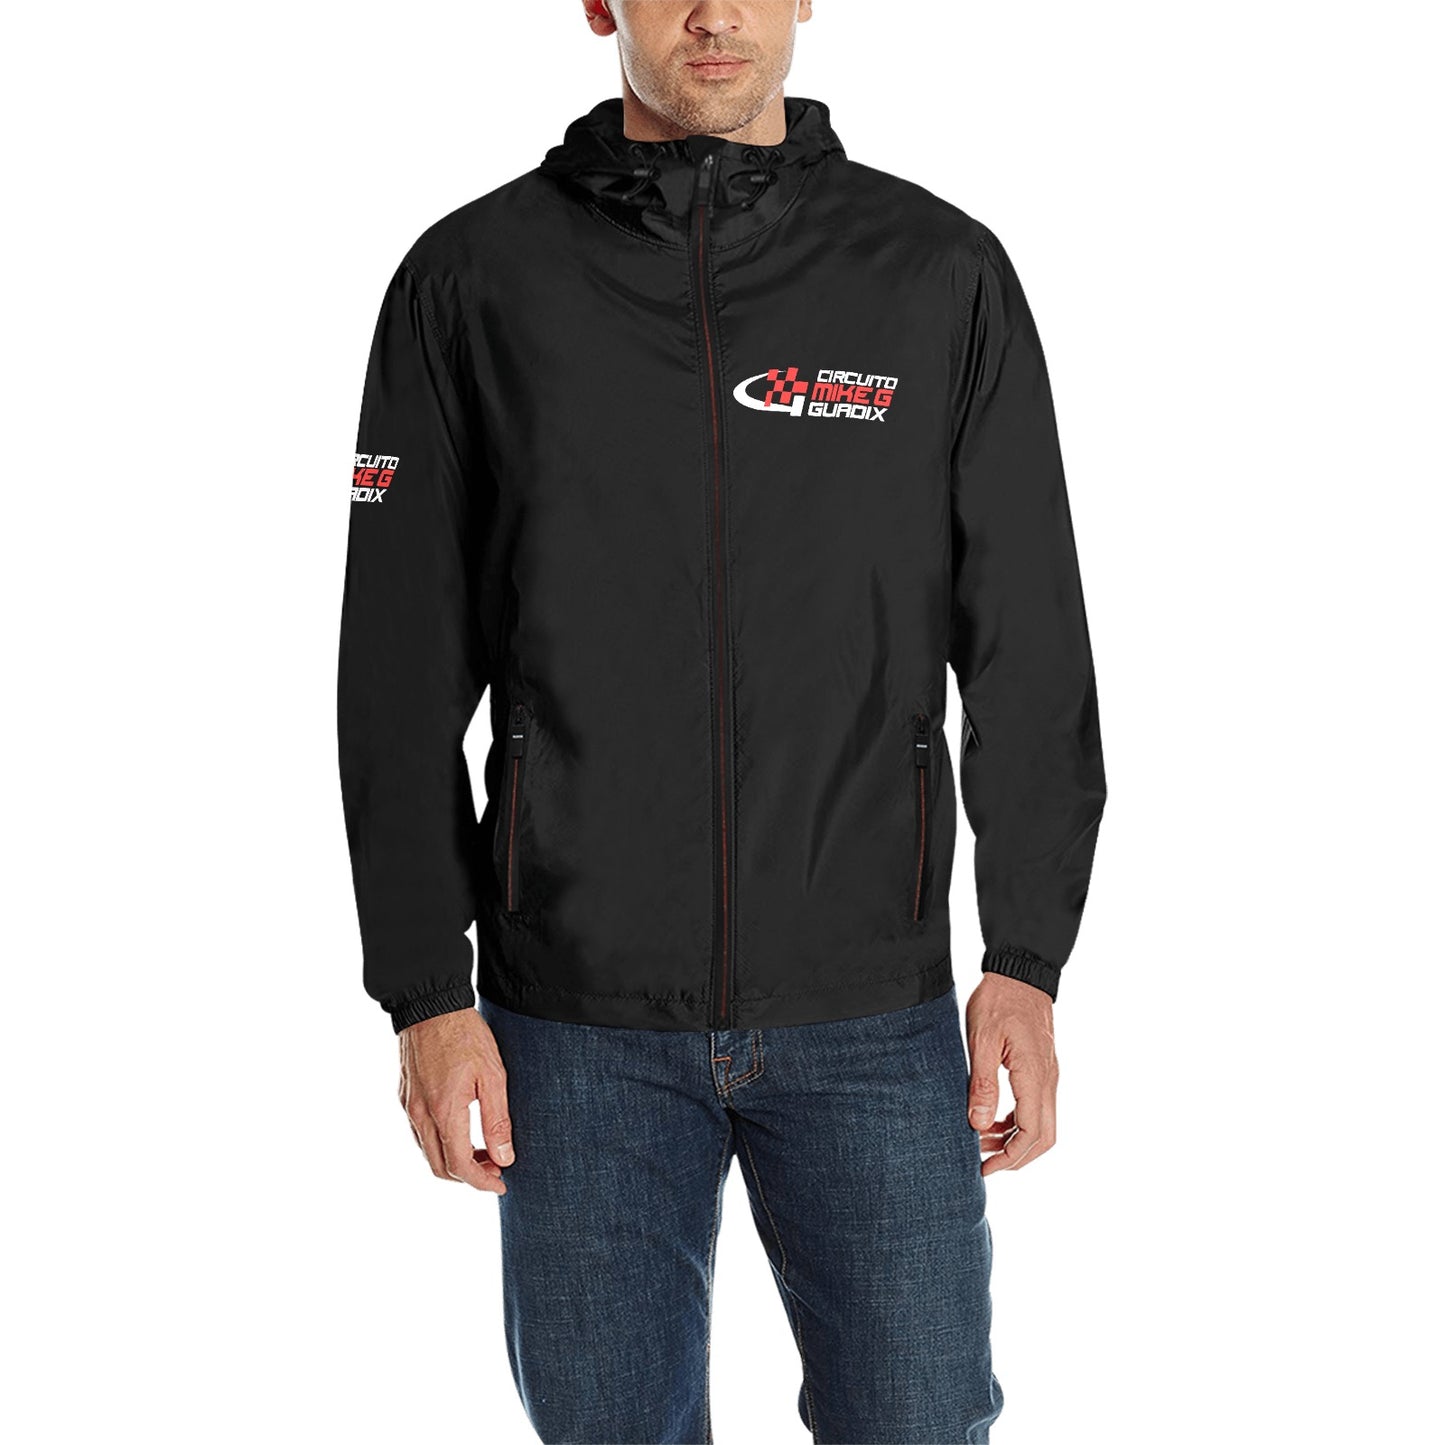 CIRCUITO MIKE G GUADIX Quilted Waterproof windbreaker jacket - carbon